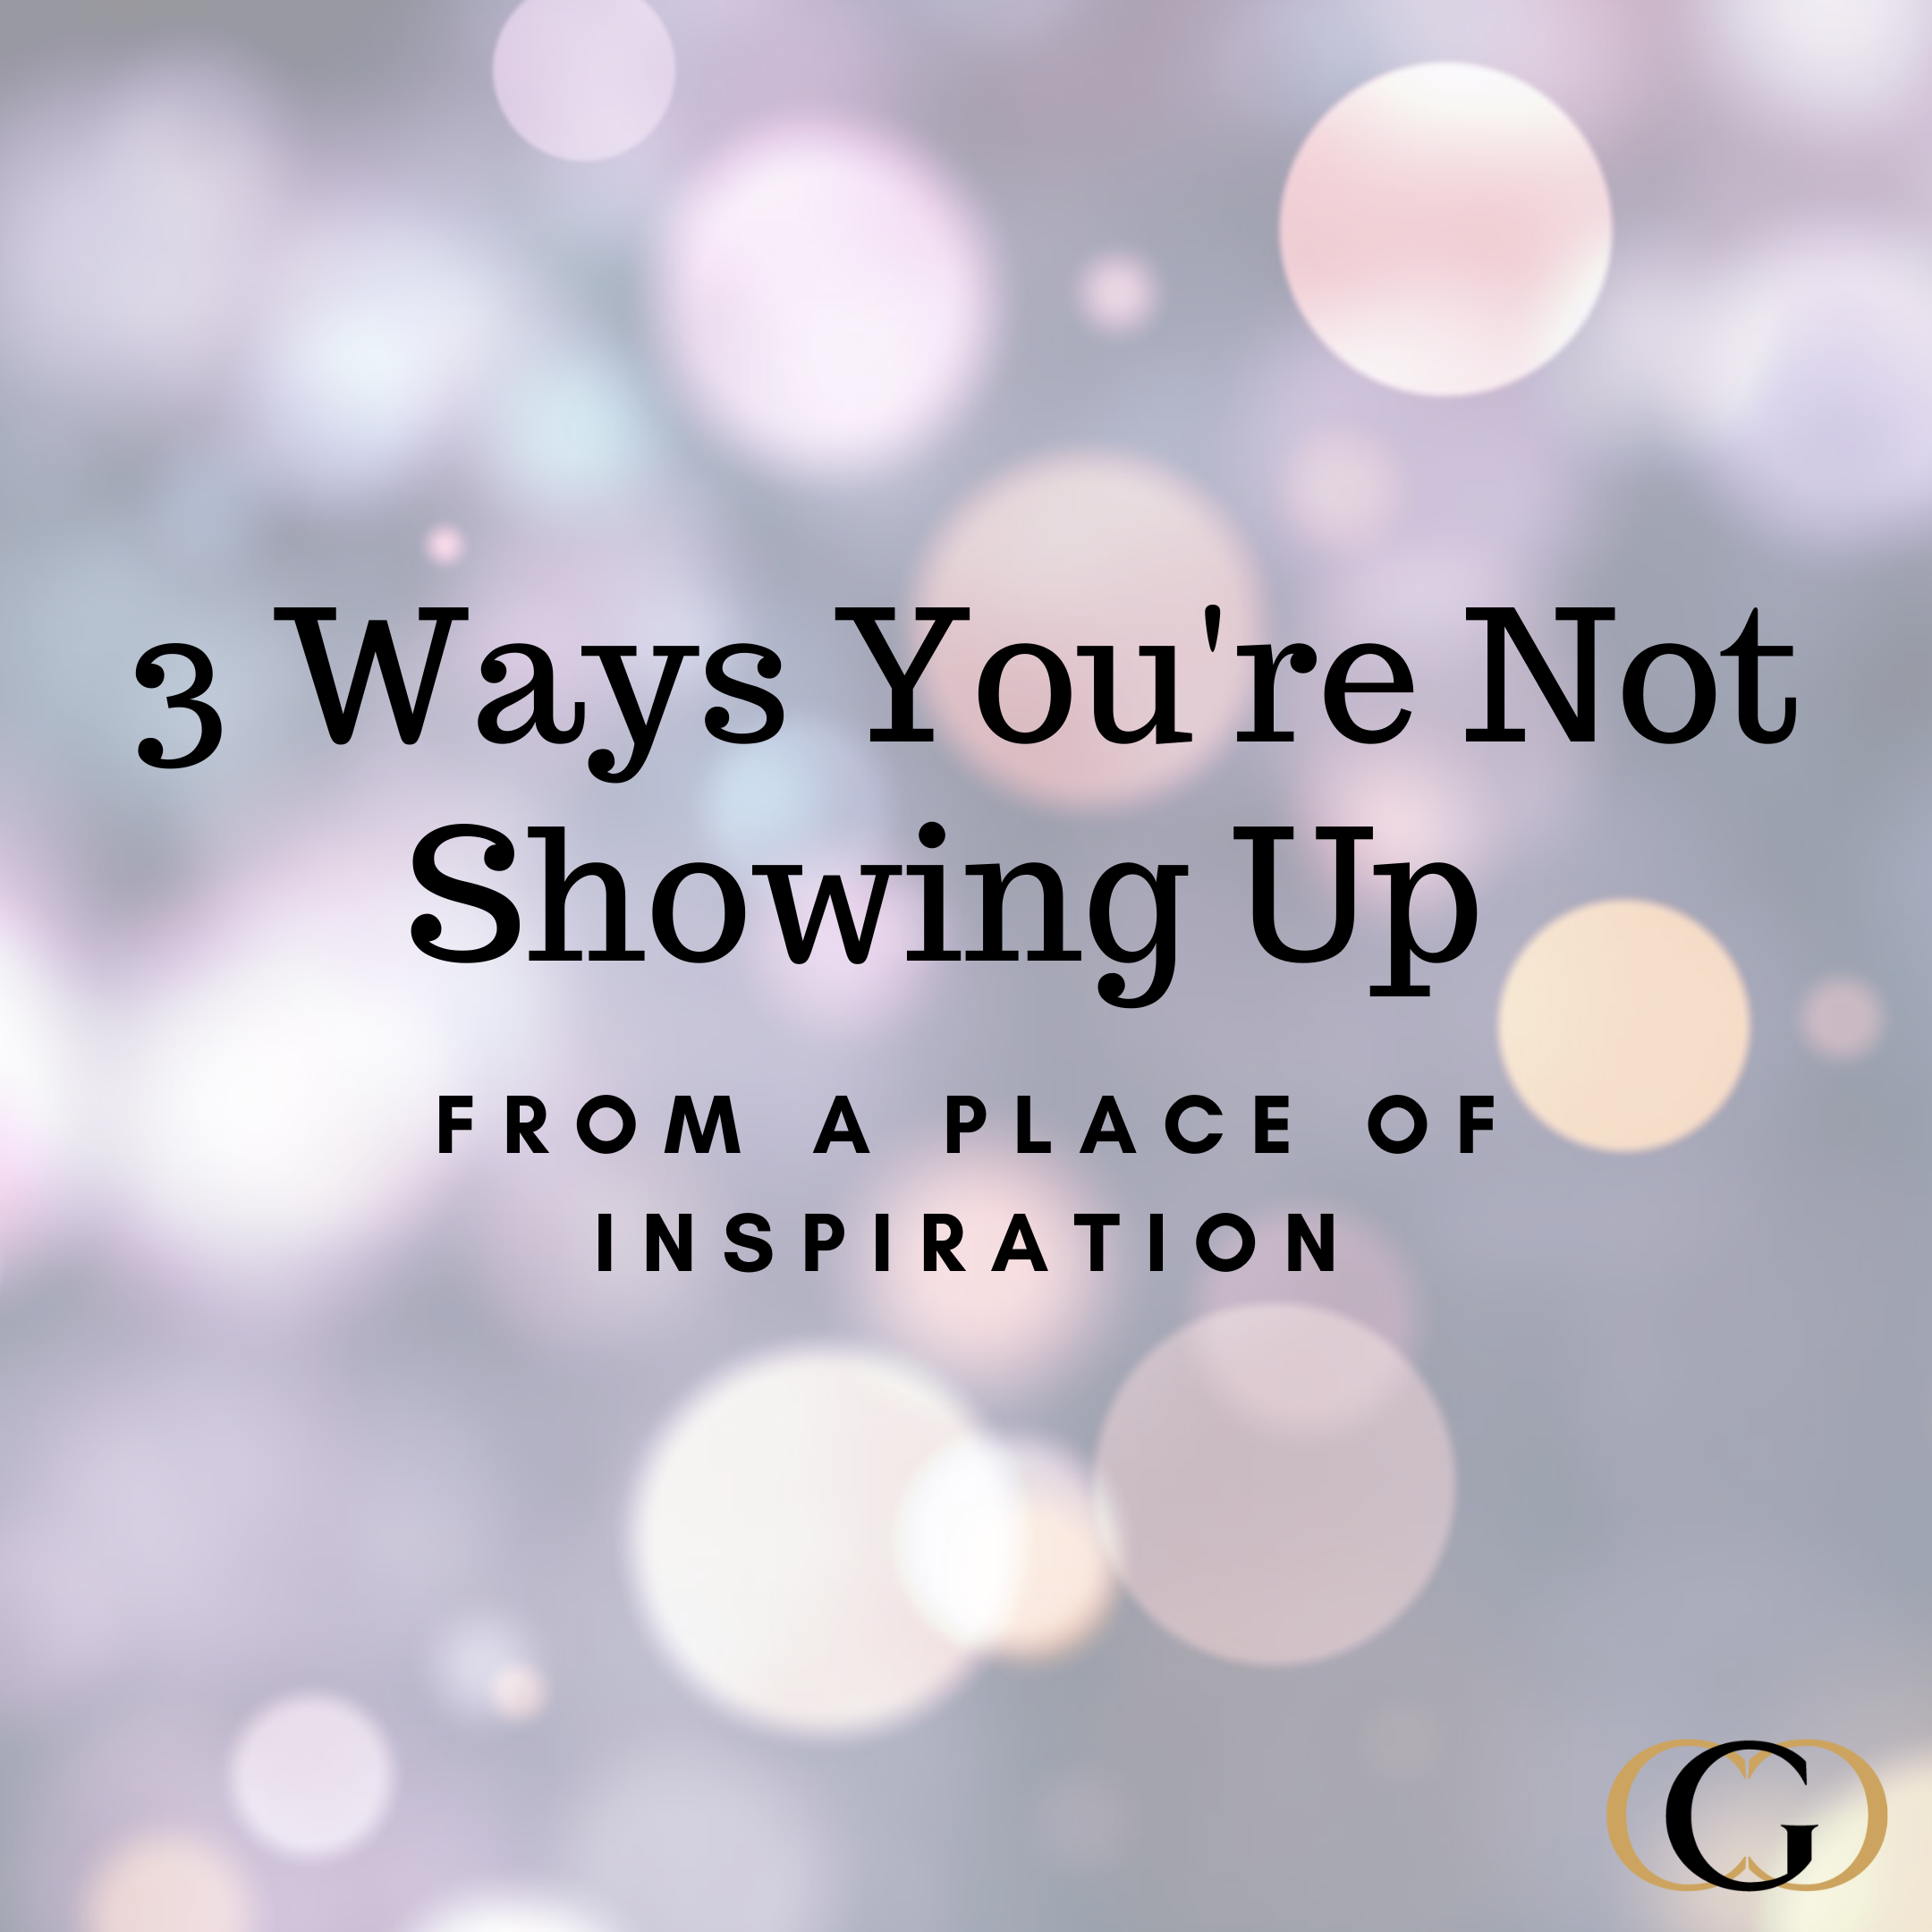 3 Ways You’re Not Showing Up from a Place of Inspiration